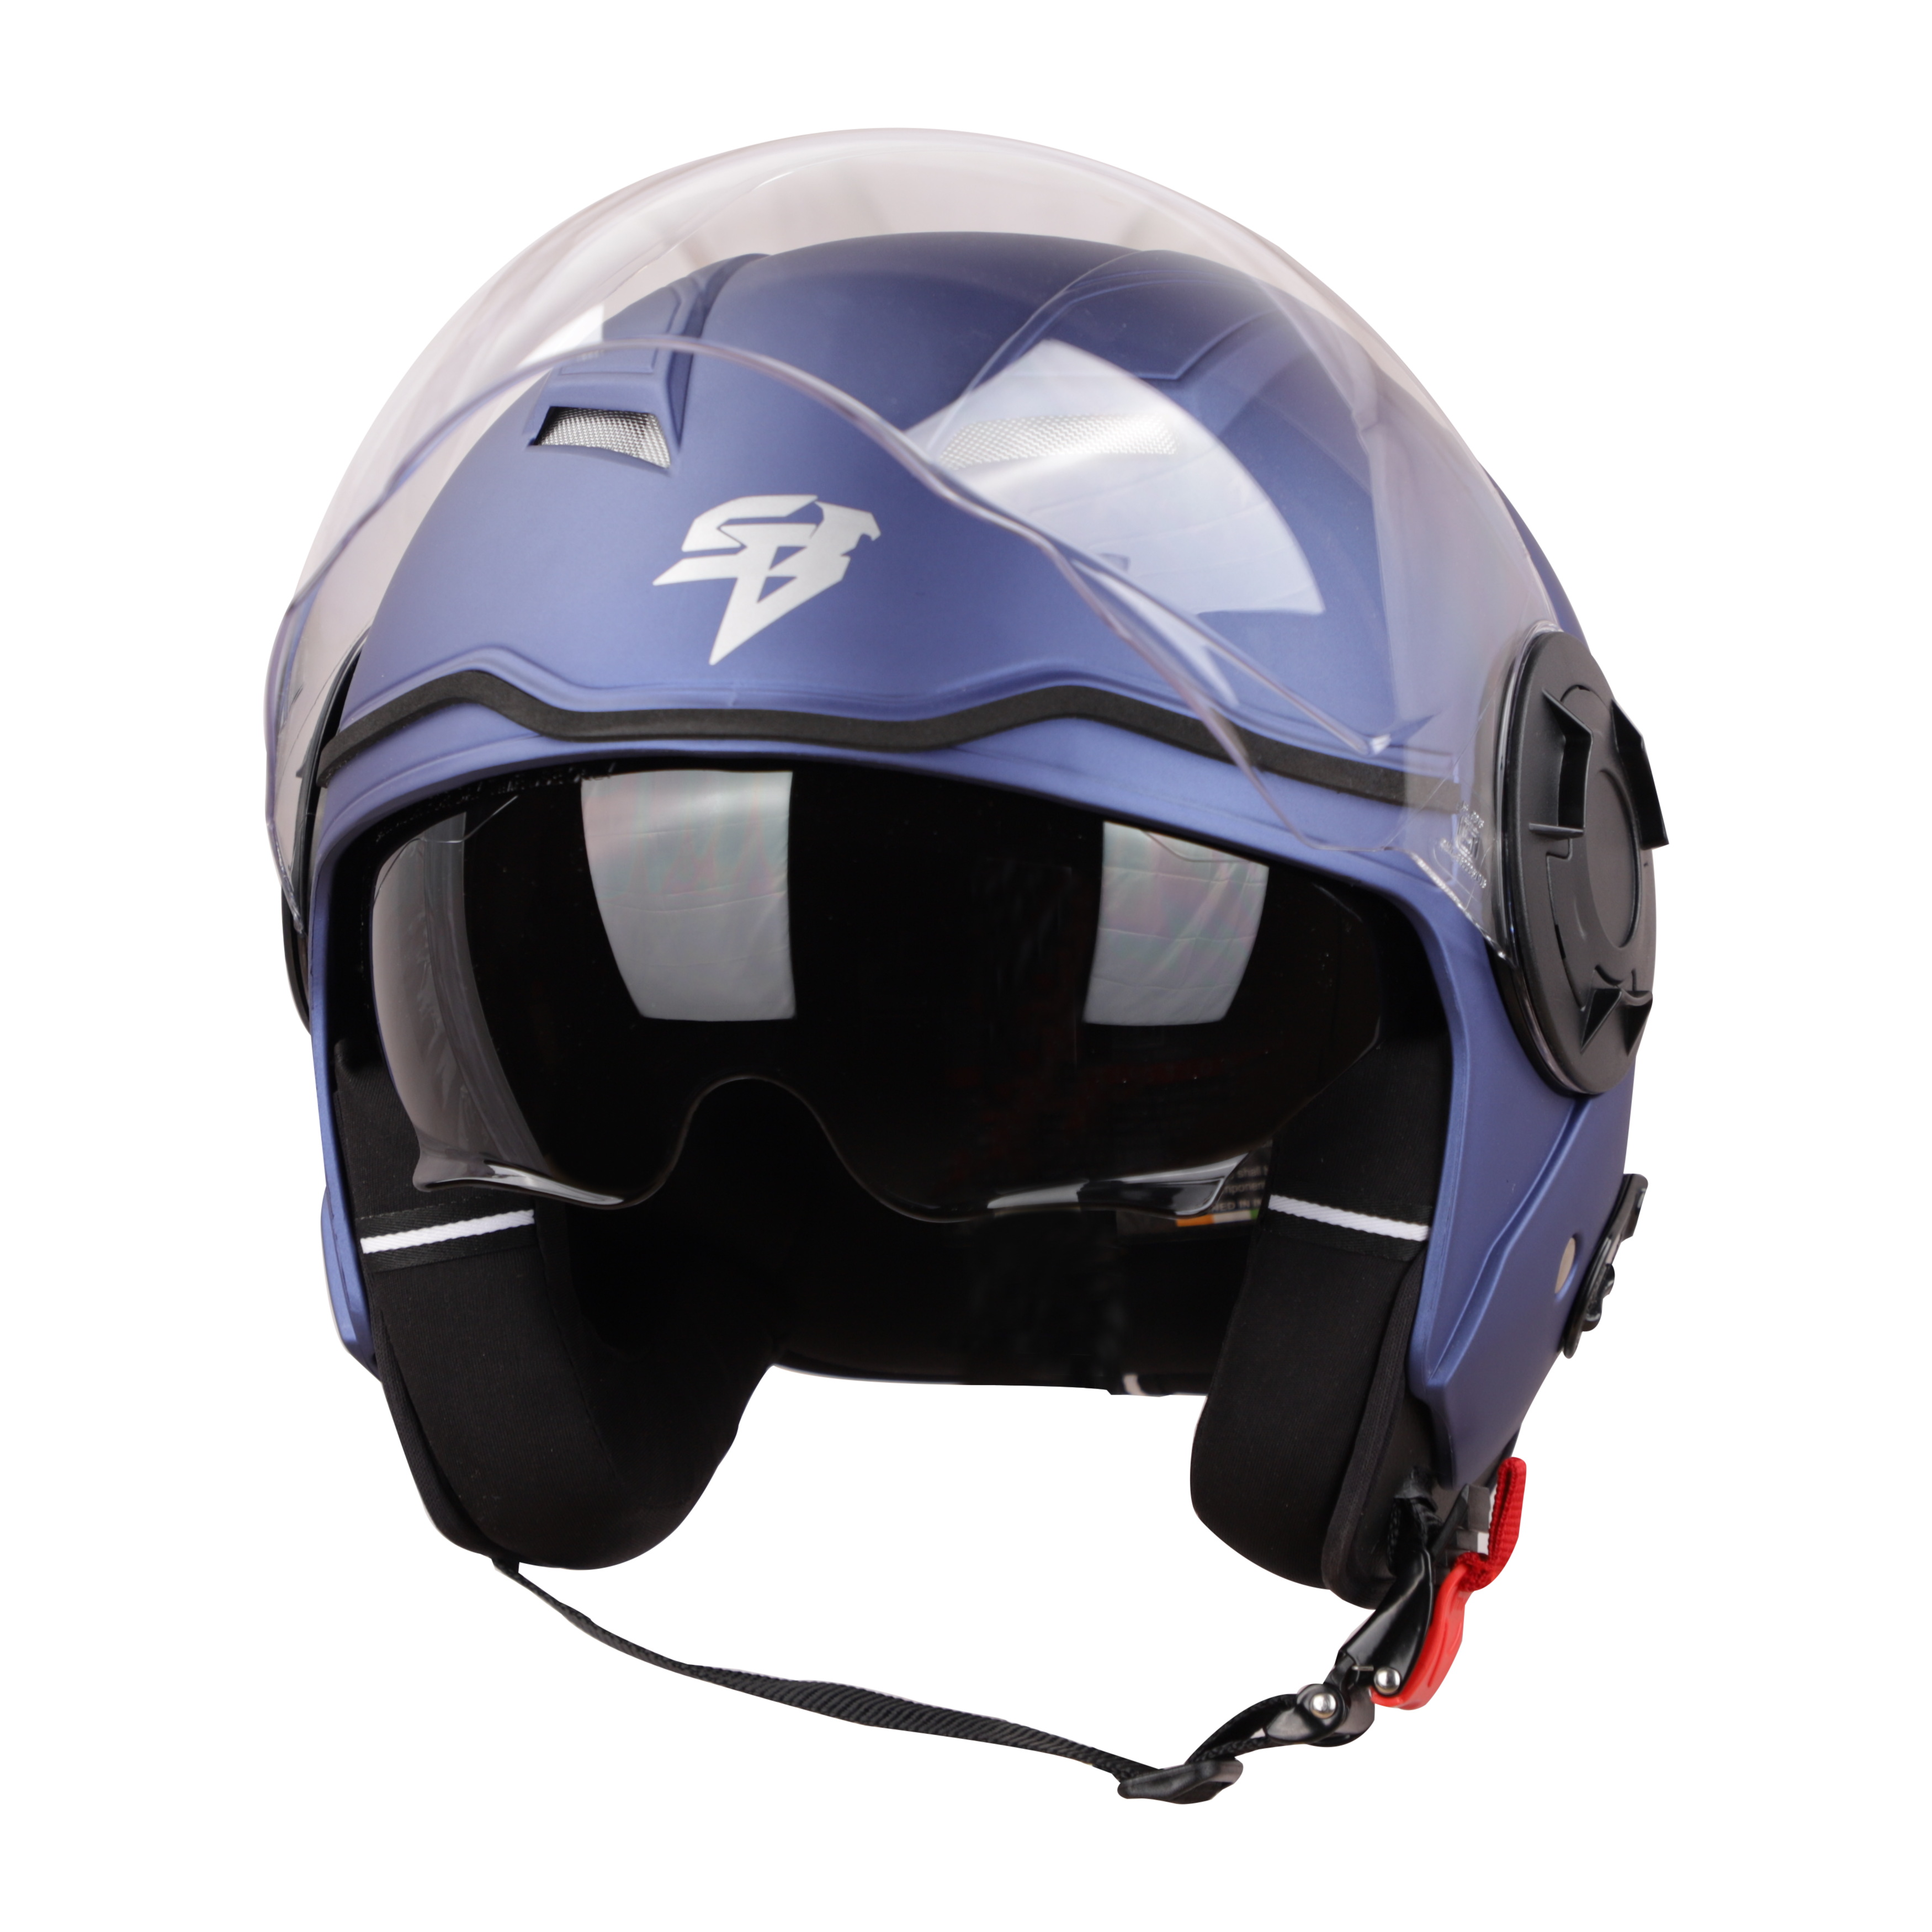 SBH-31 DRX GLOSSY H.BLUE WITH INNER SUN SHIELD